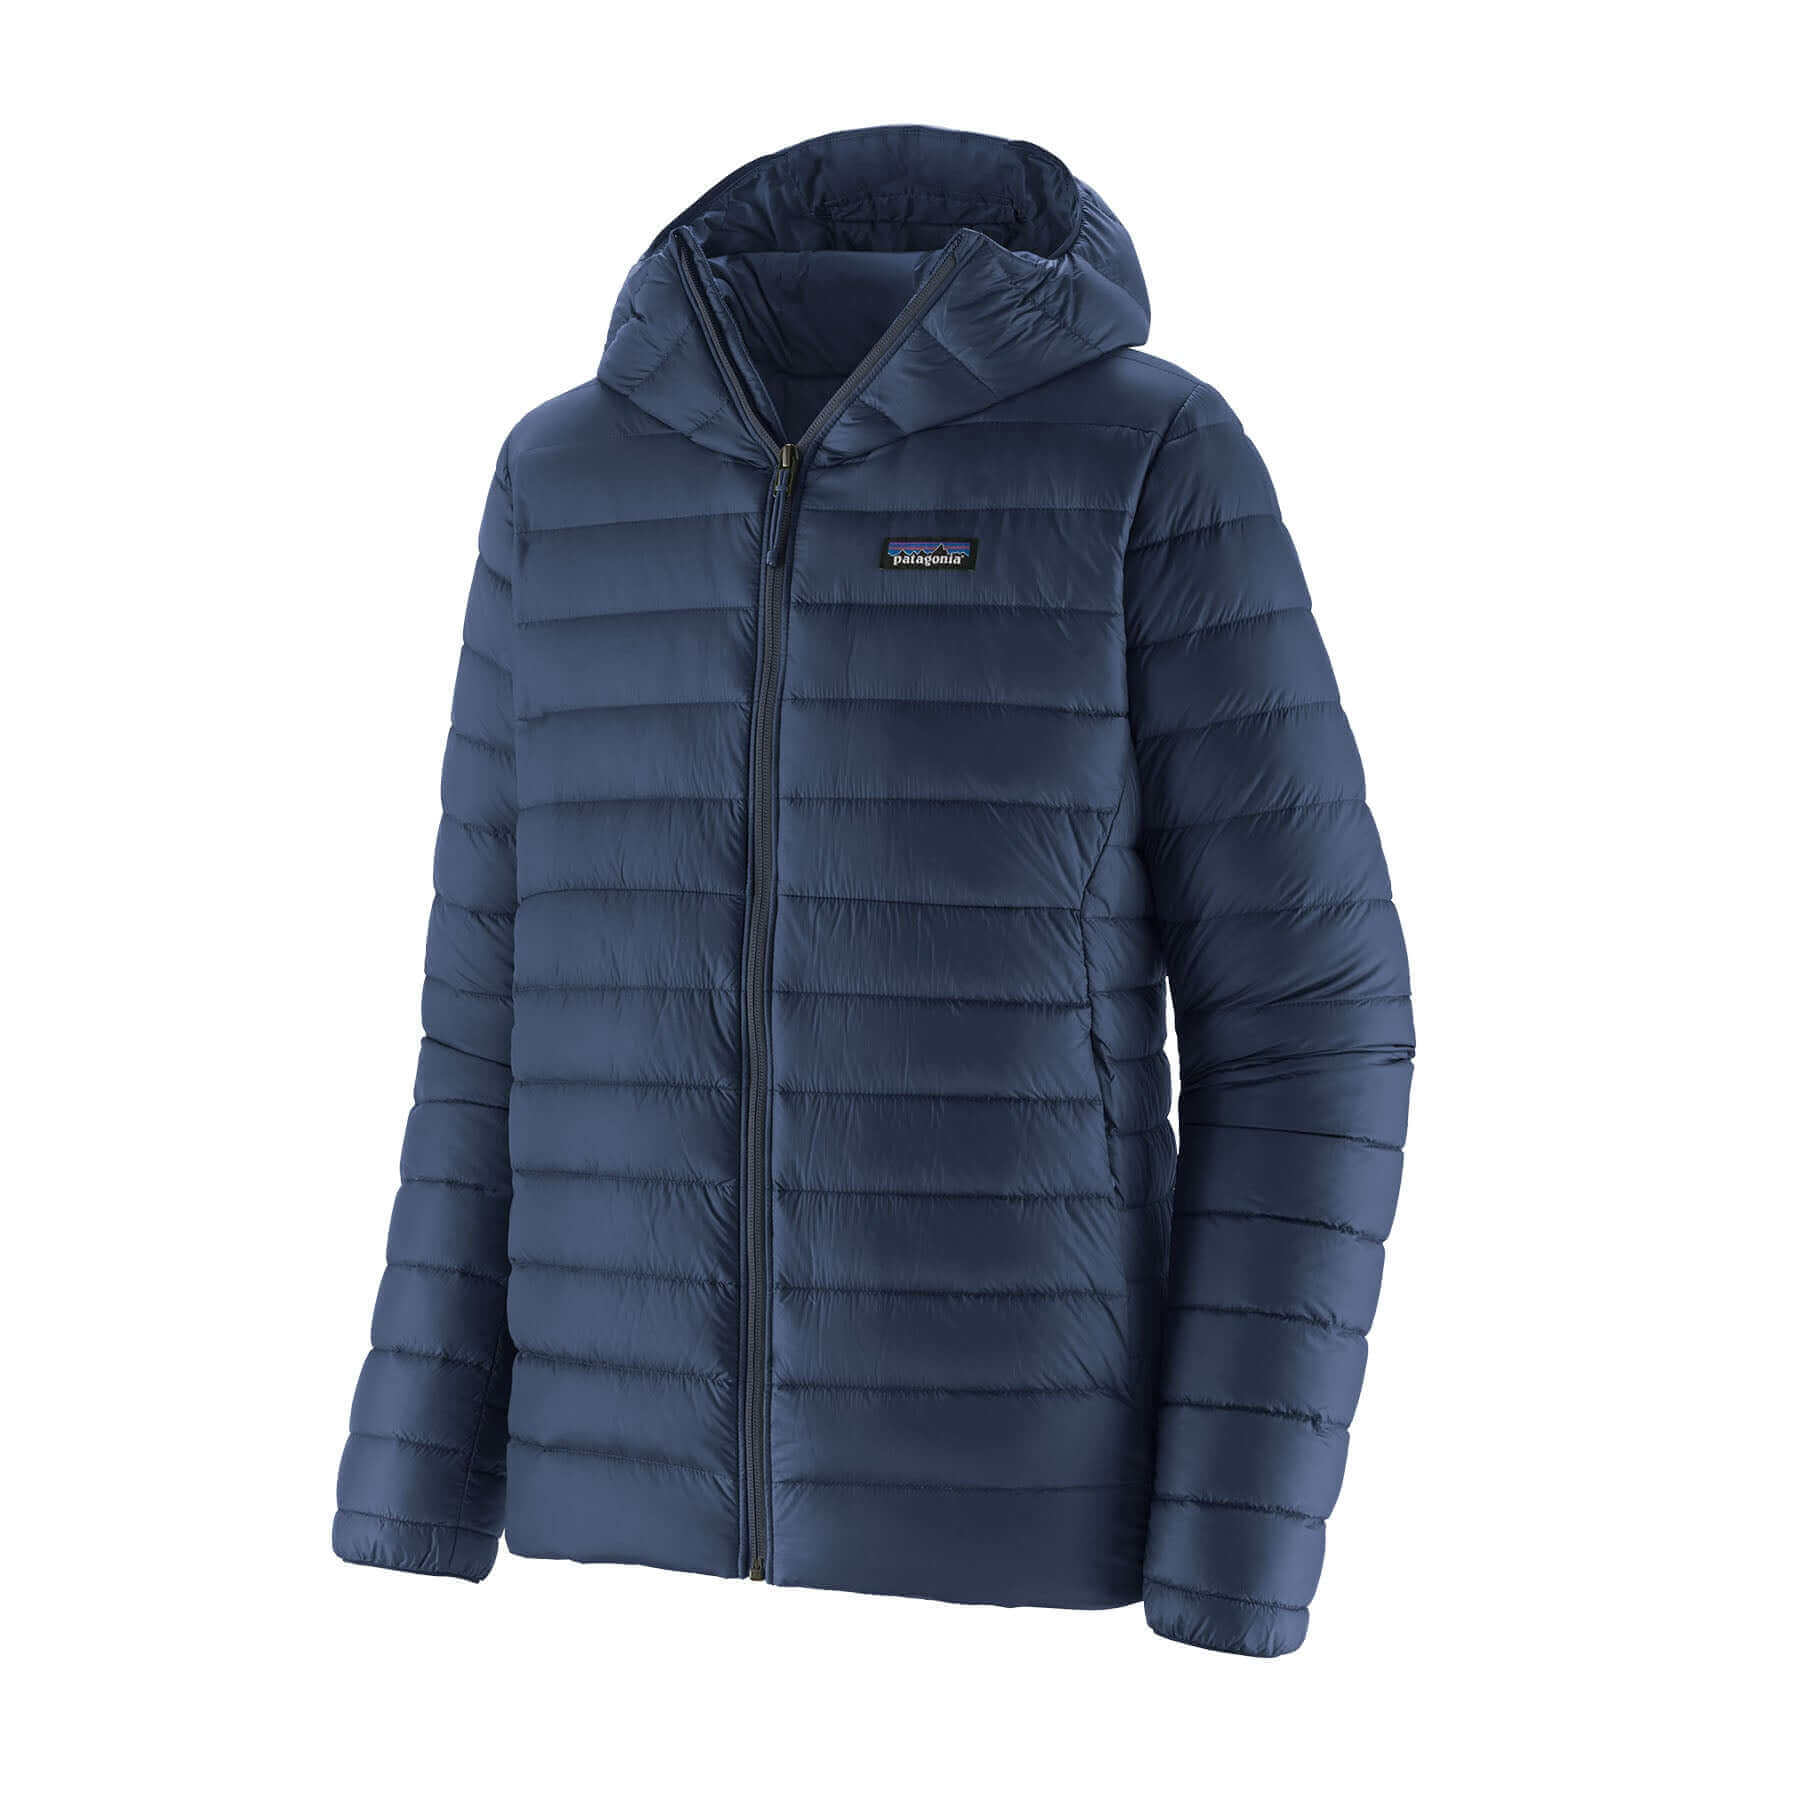 Patagonia Bend - Patagonia has partnered with Bureo and introduced a new  lineup of NetPlus products, such as the Men's and Women's Downdrift jacket.  Collaborating to keep our oceans healthy, these jacket's